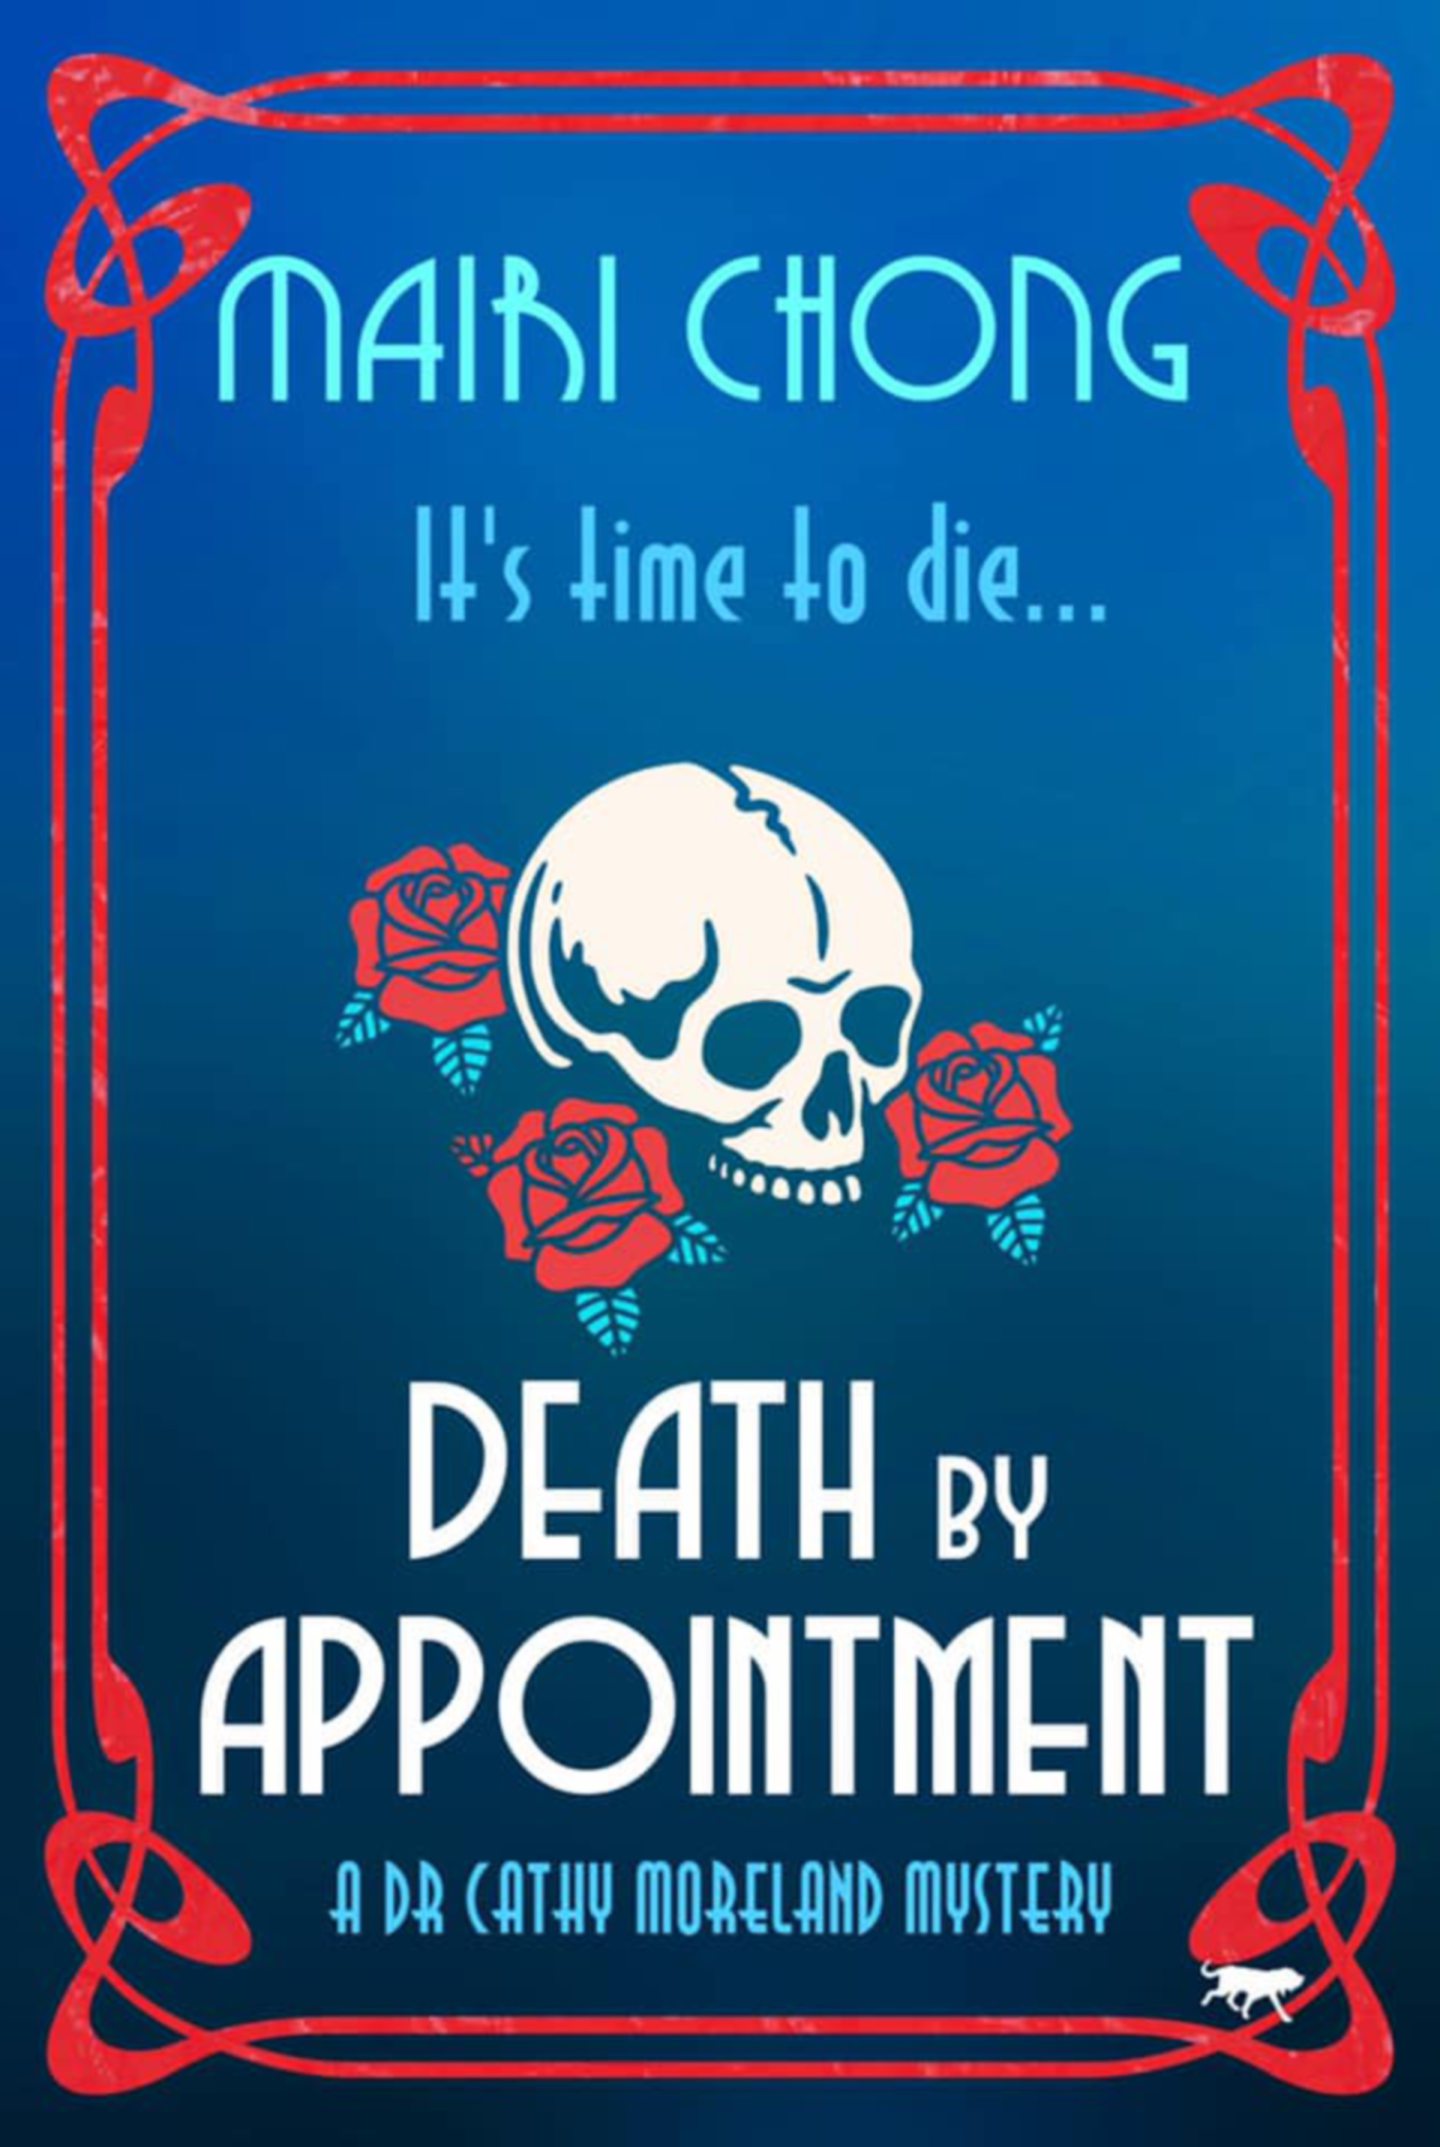 Death By Appointment, the first in Marie Chong's Dr Cathy Moreland Mysteries series. 